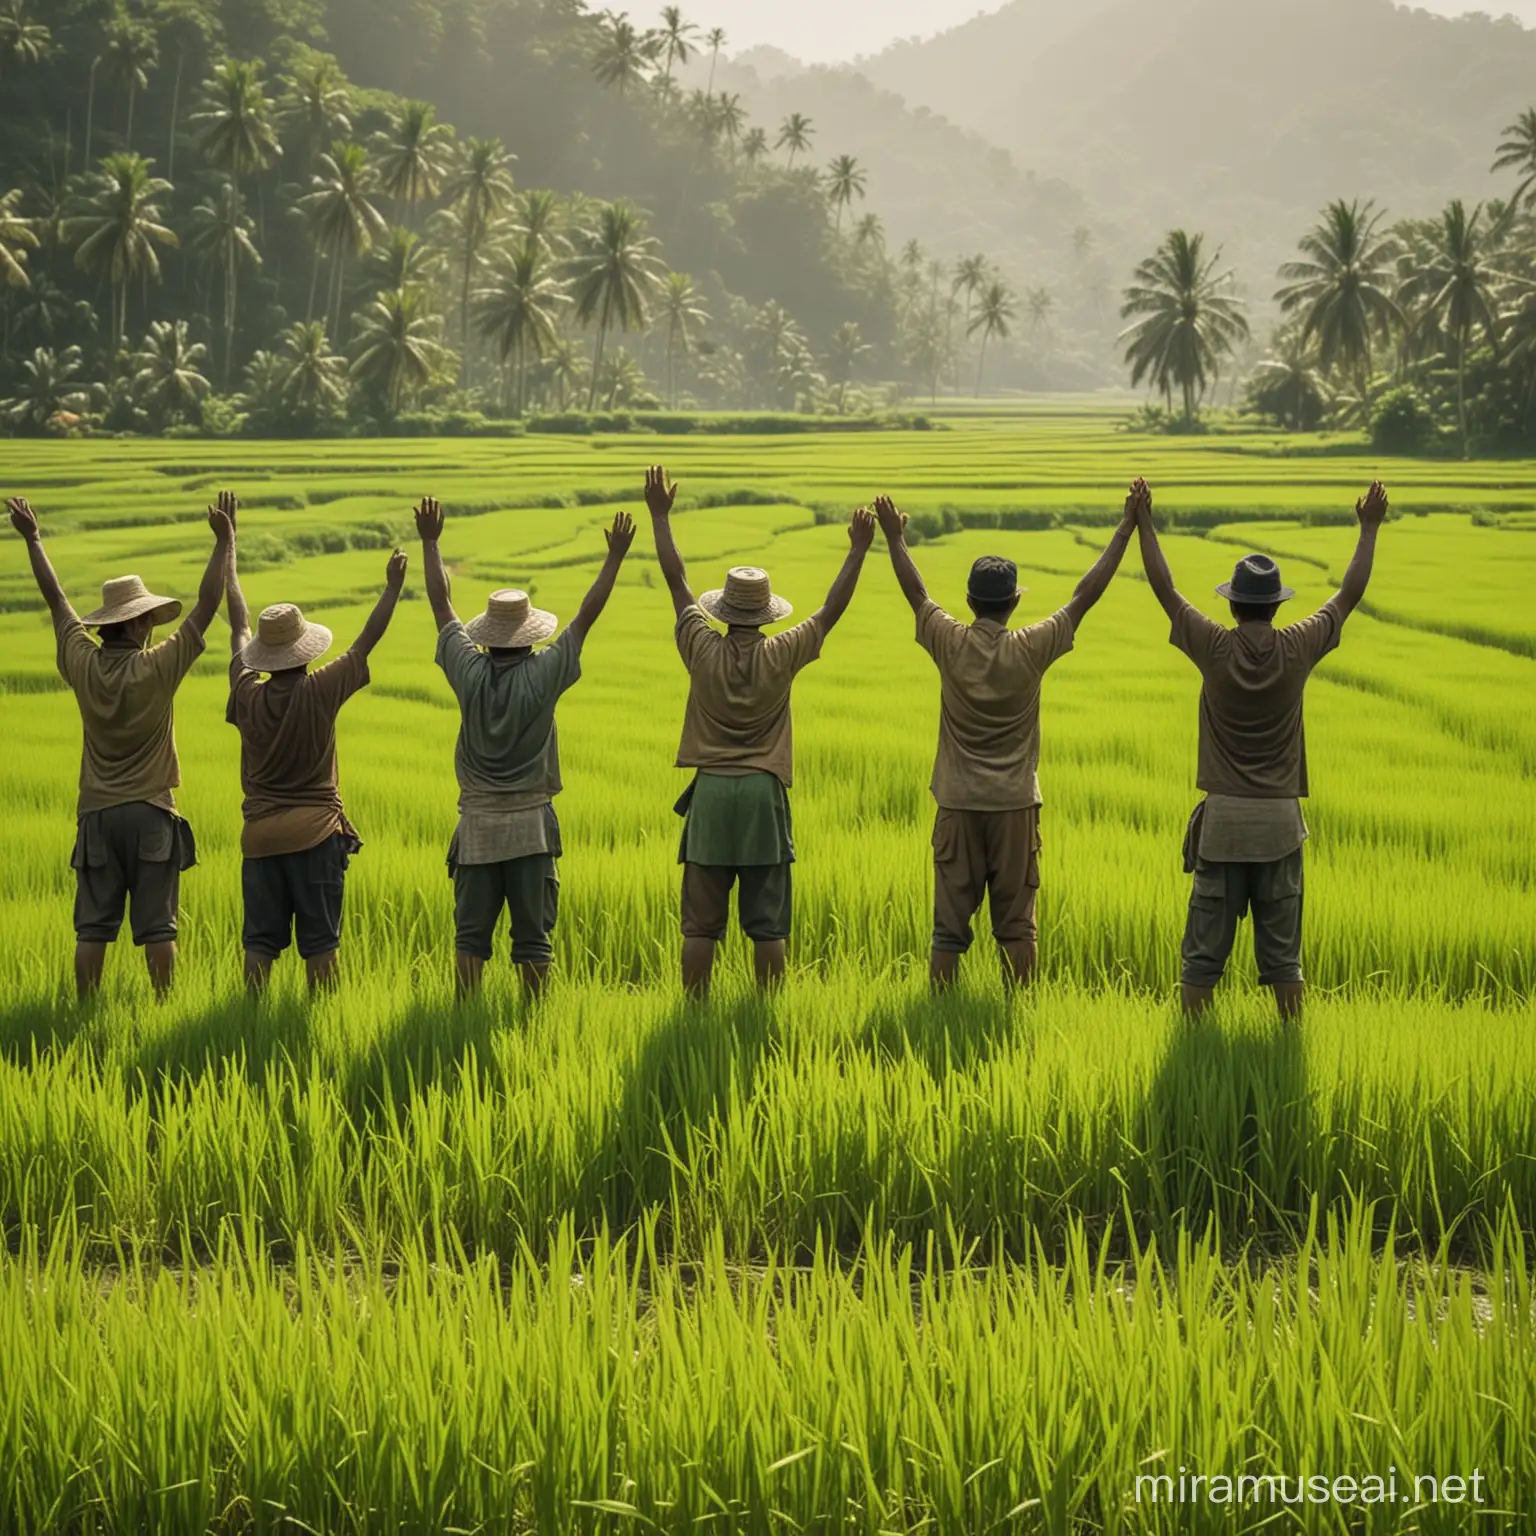 
"Please create an image featuring multiple farmers raising their hands high in determination on a lush green rice field. The farmers are depicted amidst the vibrant greenery of the rice paddies, with their hands raised high, displaying their resolute commitment. The scene evokes a sense of determination and unity among the farmers as they work together in the fertile and refreshing landscape of the rice field."